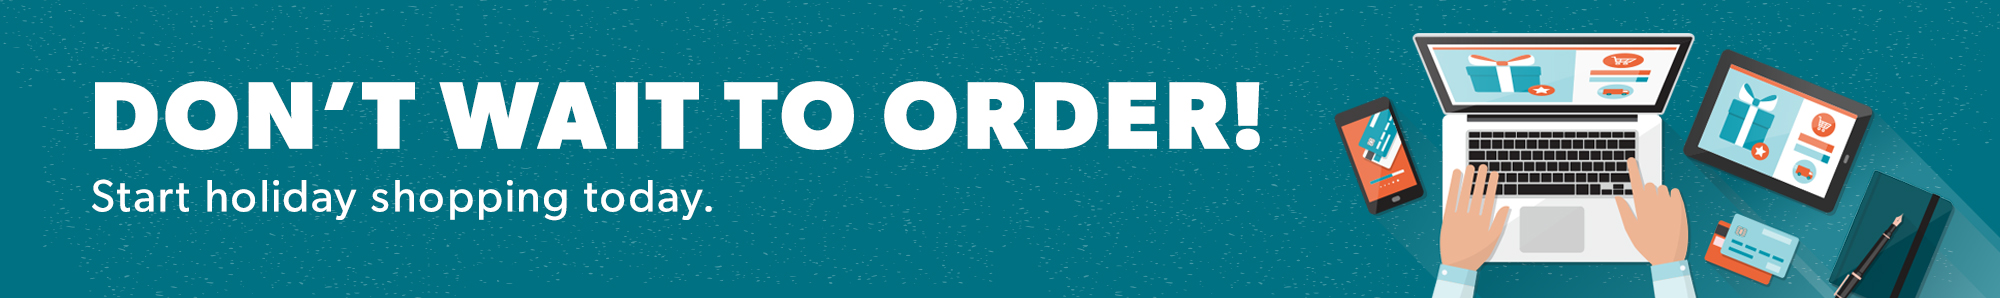 Don't Wait to Order